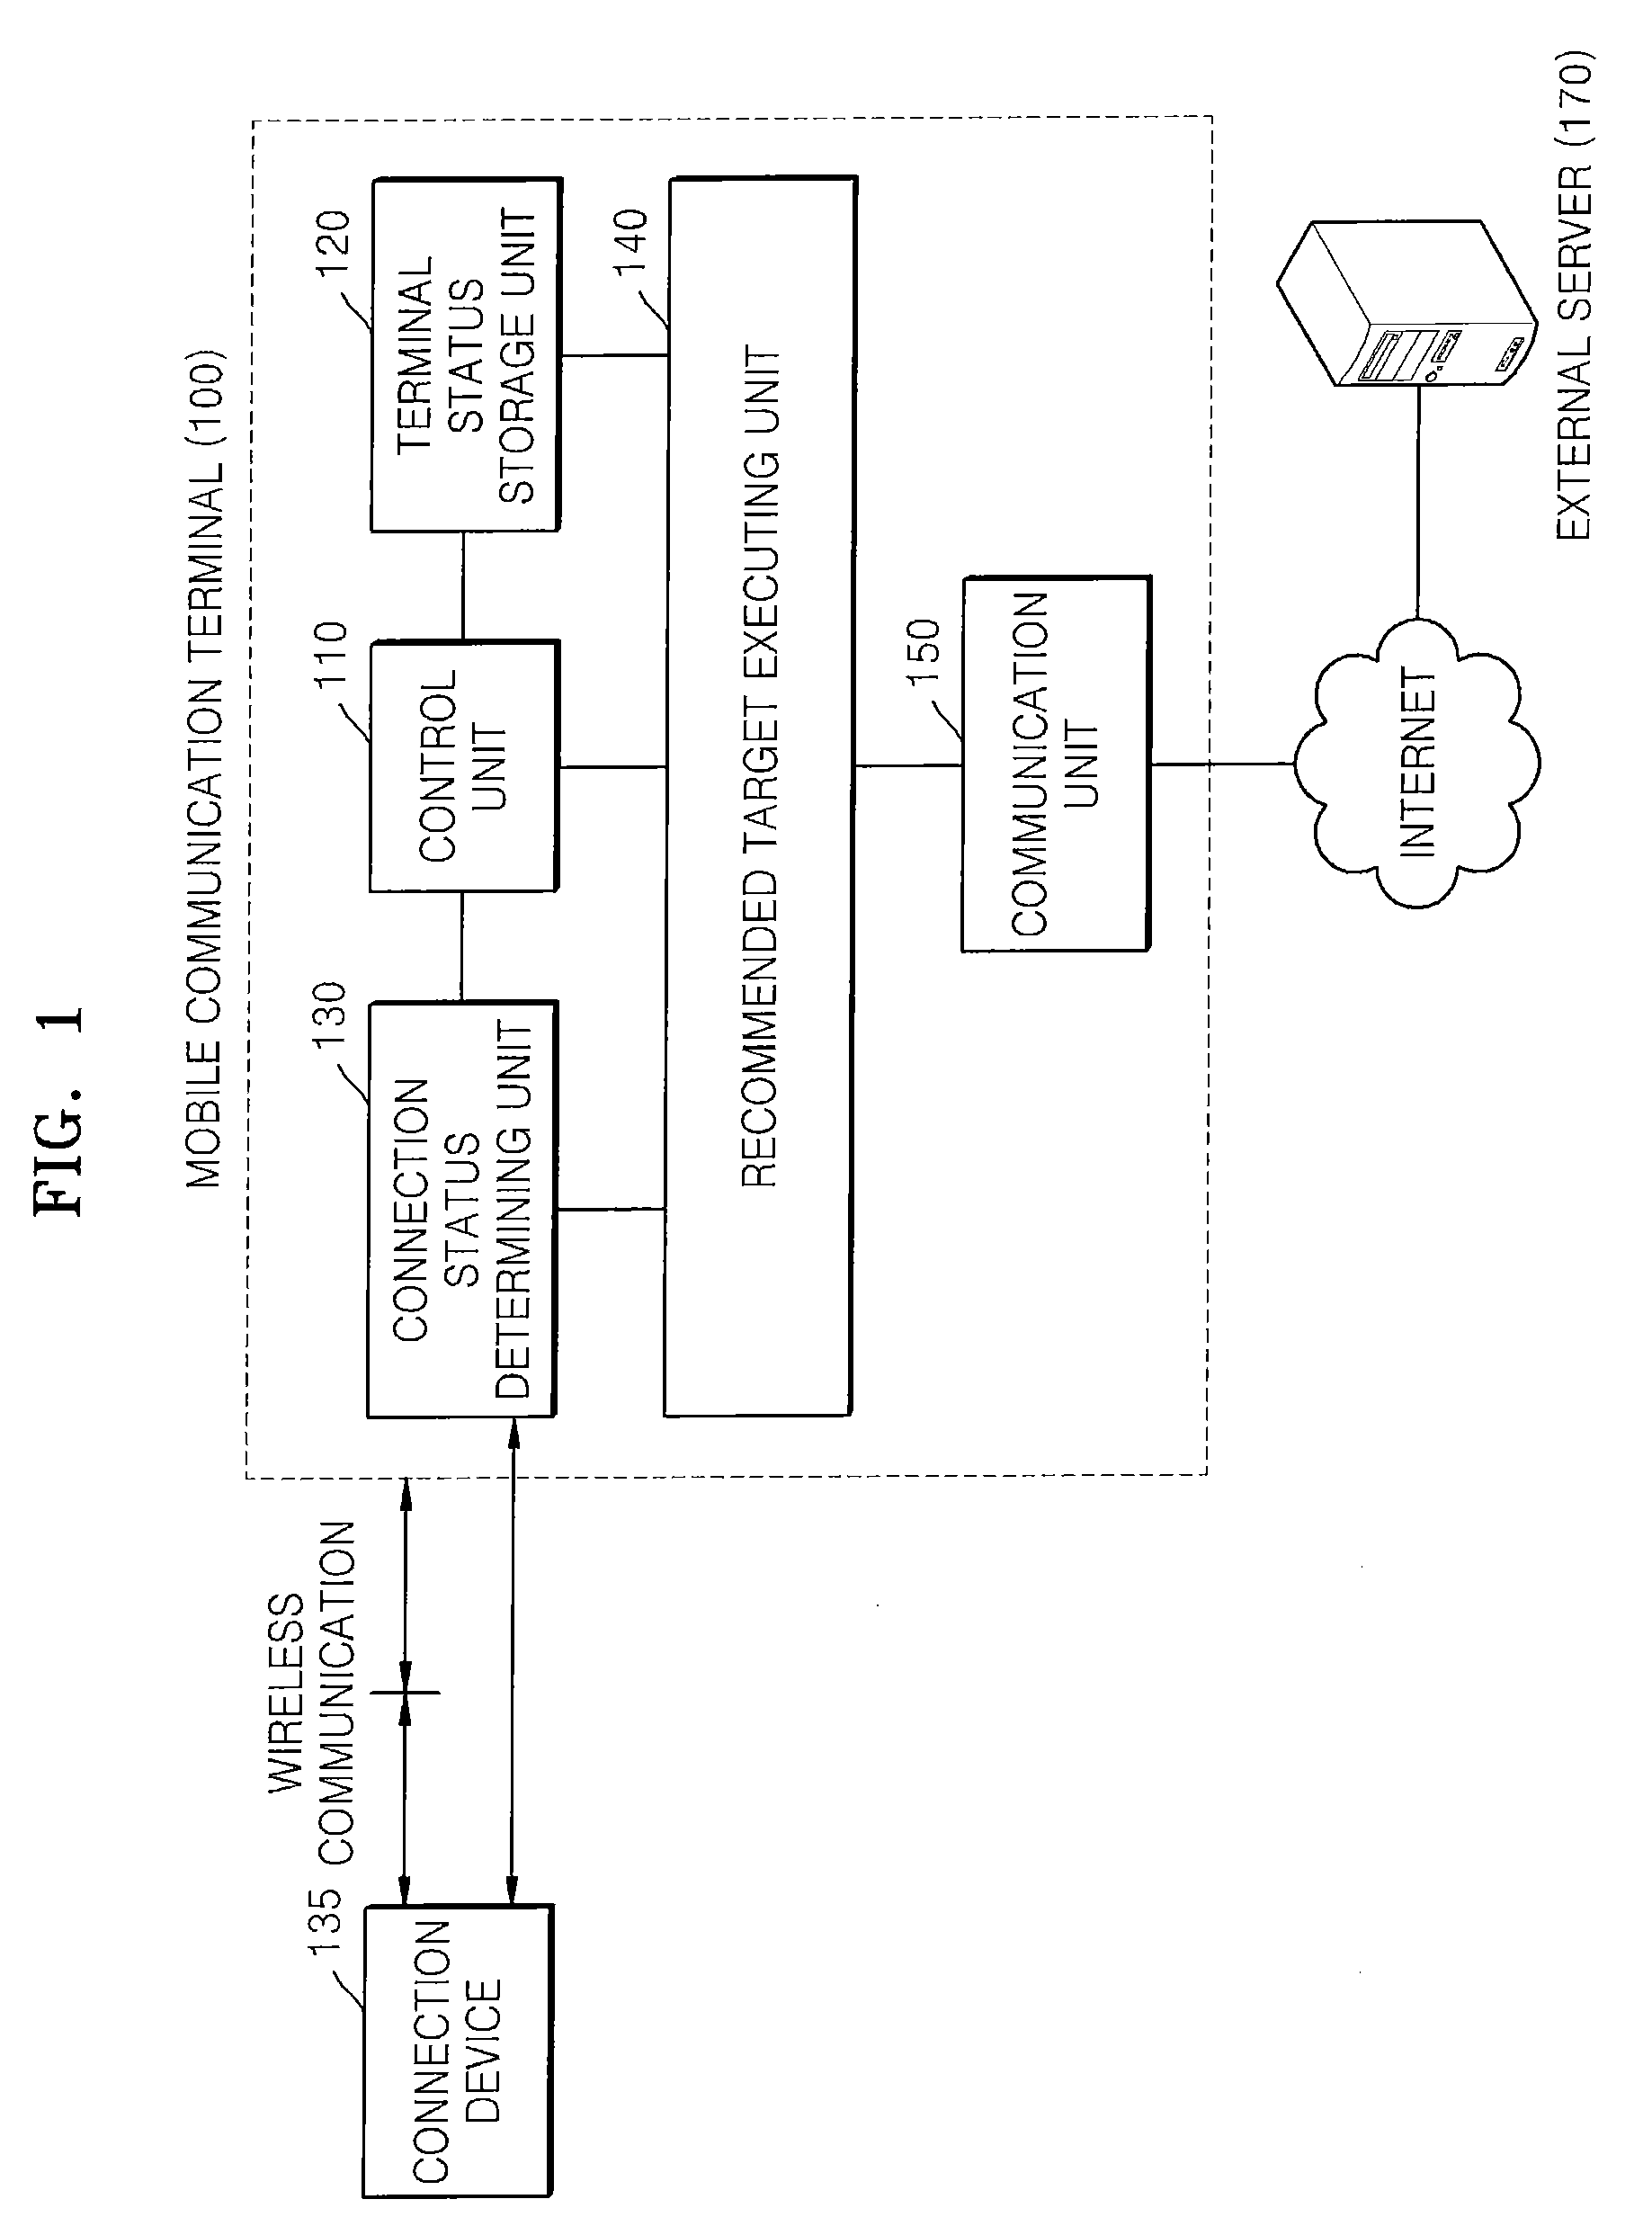 Mobile communication terminal and method of recommending application or content